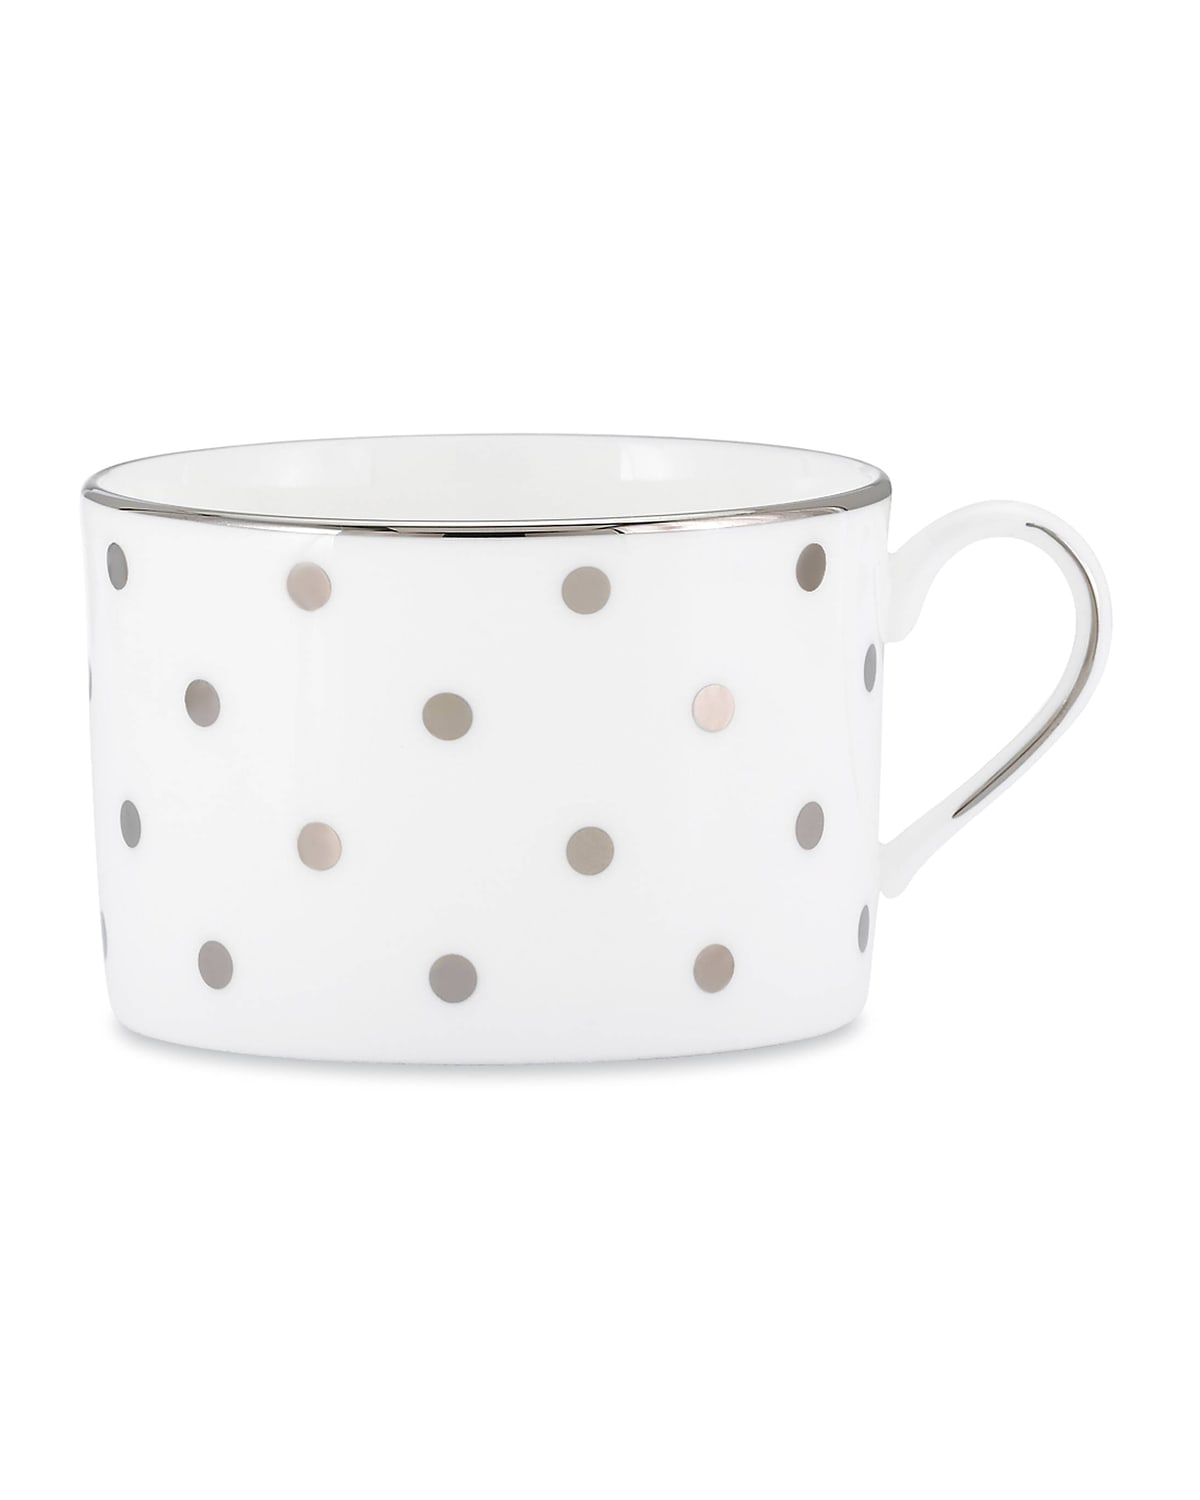 Kate Spade New York Larabee Road Cup In White/24k Gold